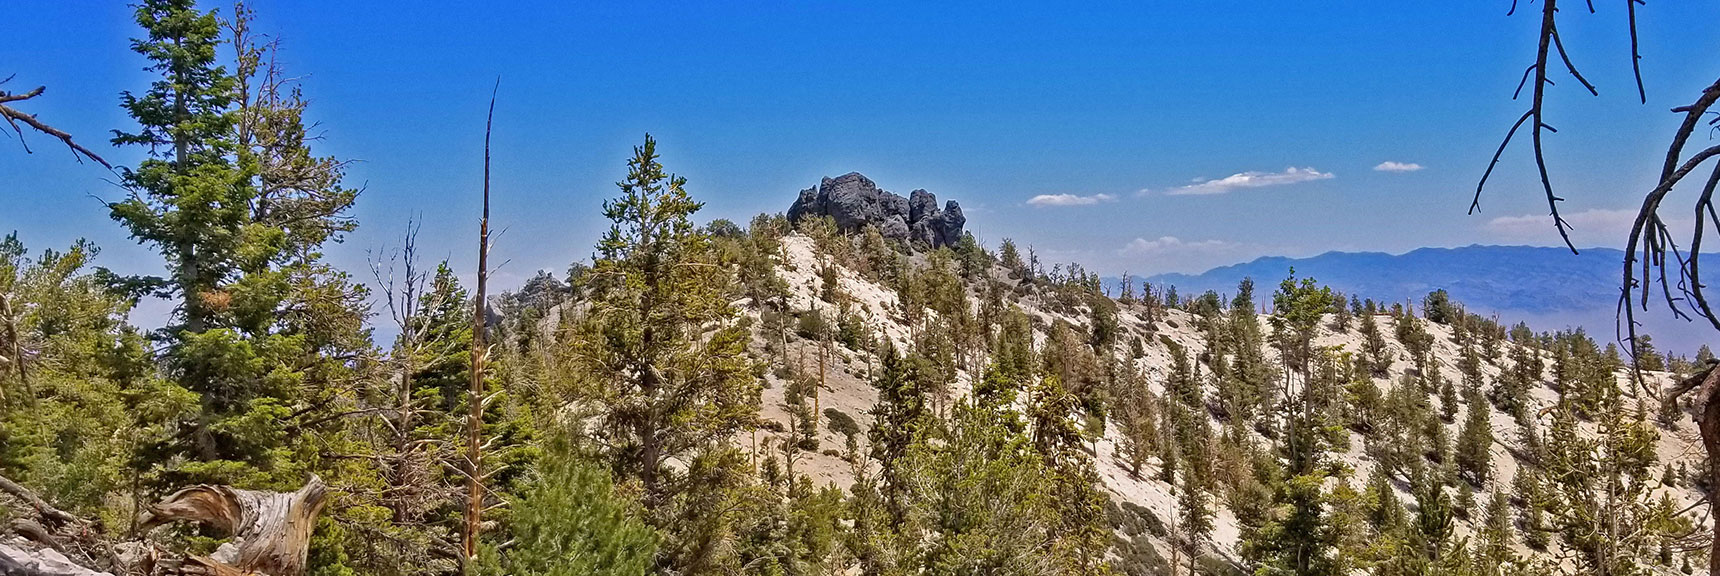 Looking Across to Black Rock Sister from the Approach Ridge | Black Rock Sister | Mt Charleston Wilderness | Lee Canyon | Spring Mountains, Nevada